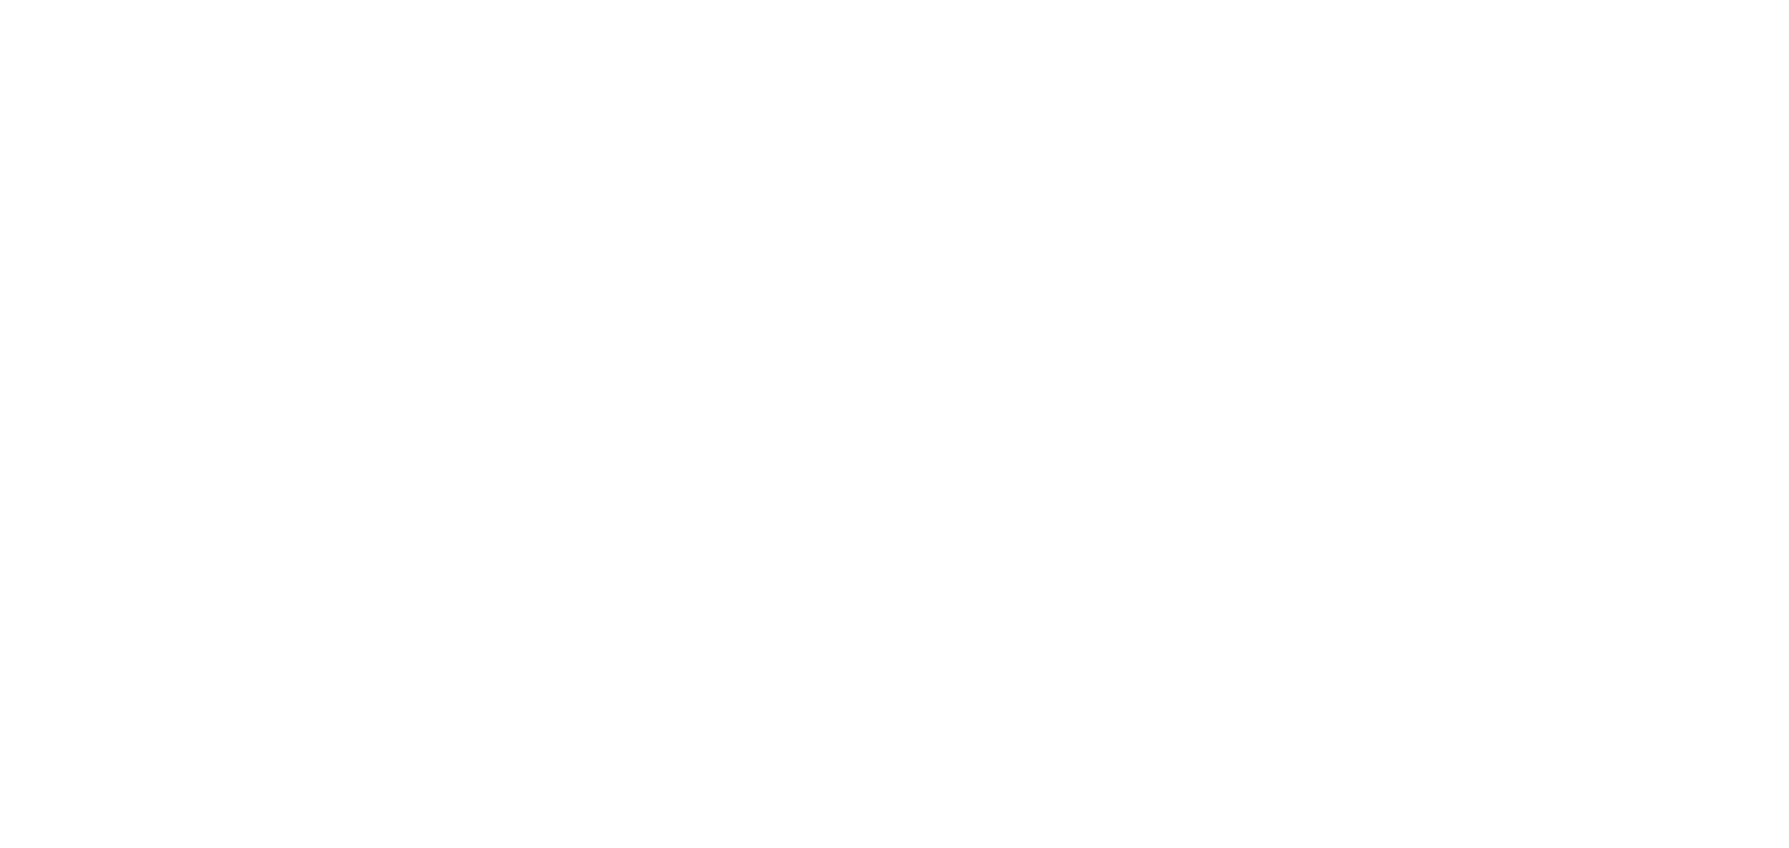 Greenwood Hill Productions